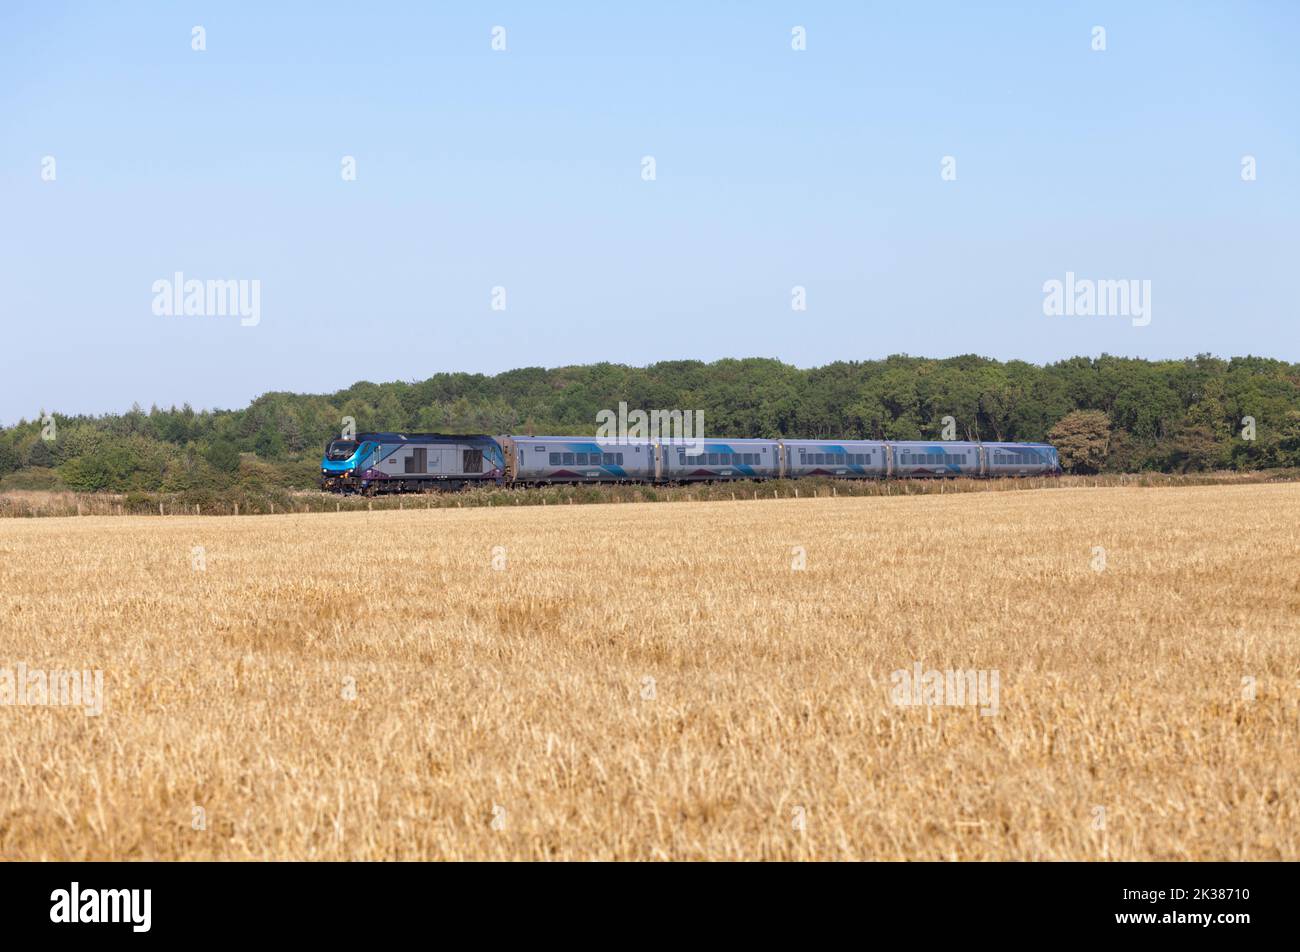 First Transpennine Express Nova 3 train with a class 68 locomotive passing arable land in Lincolnshire Stock Photo